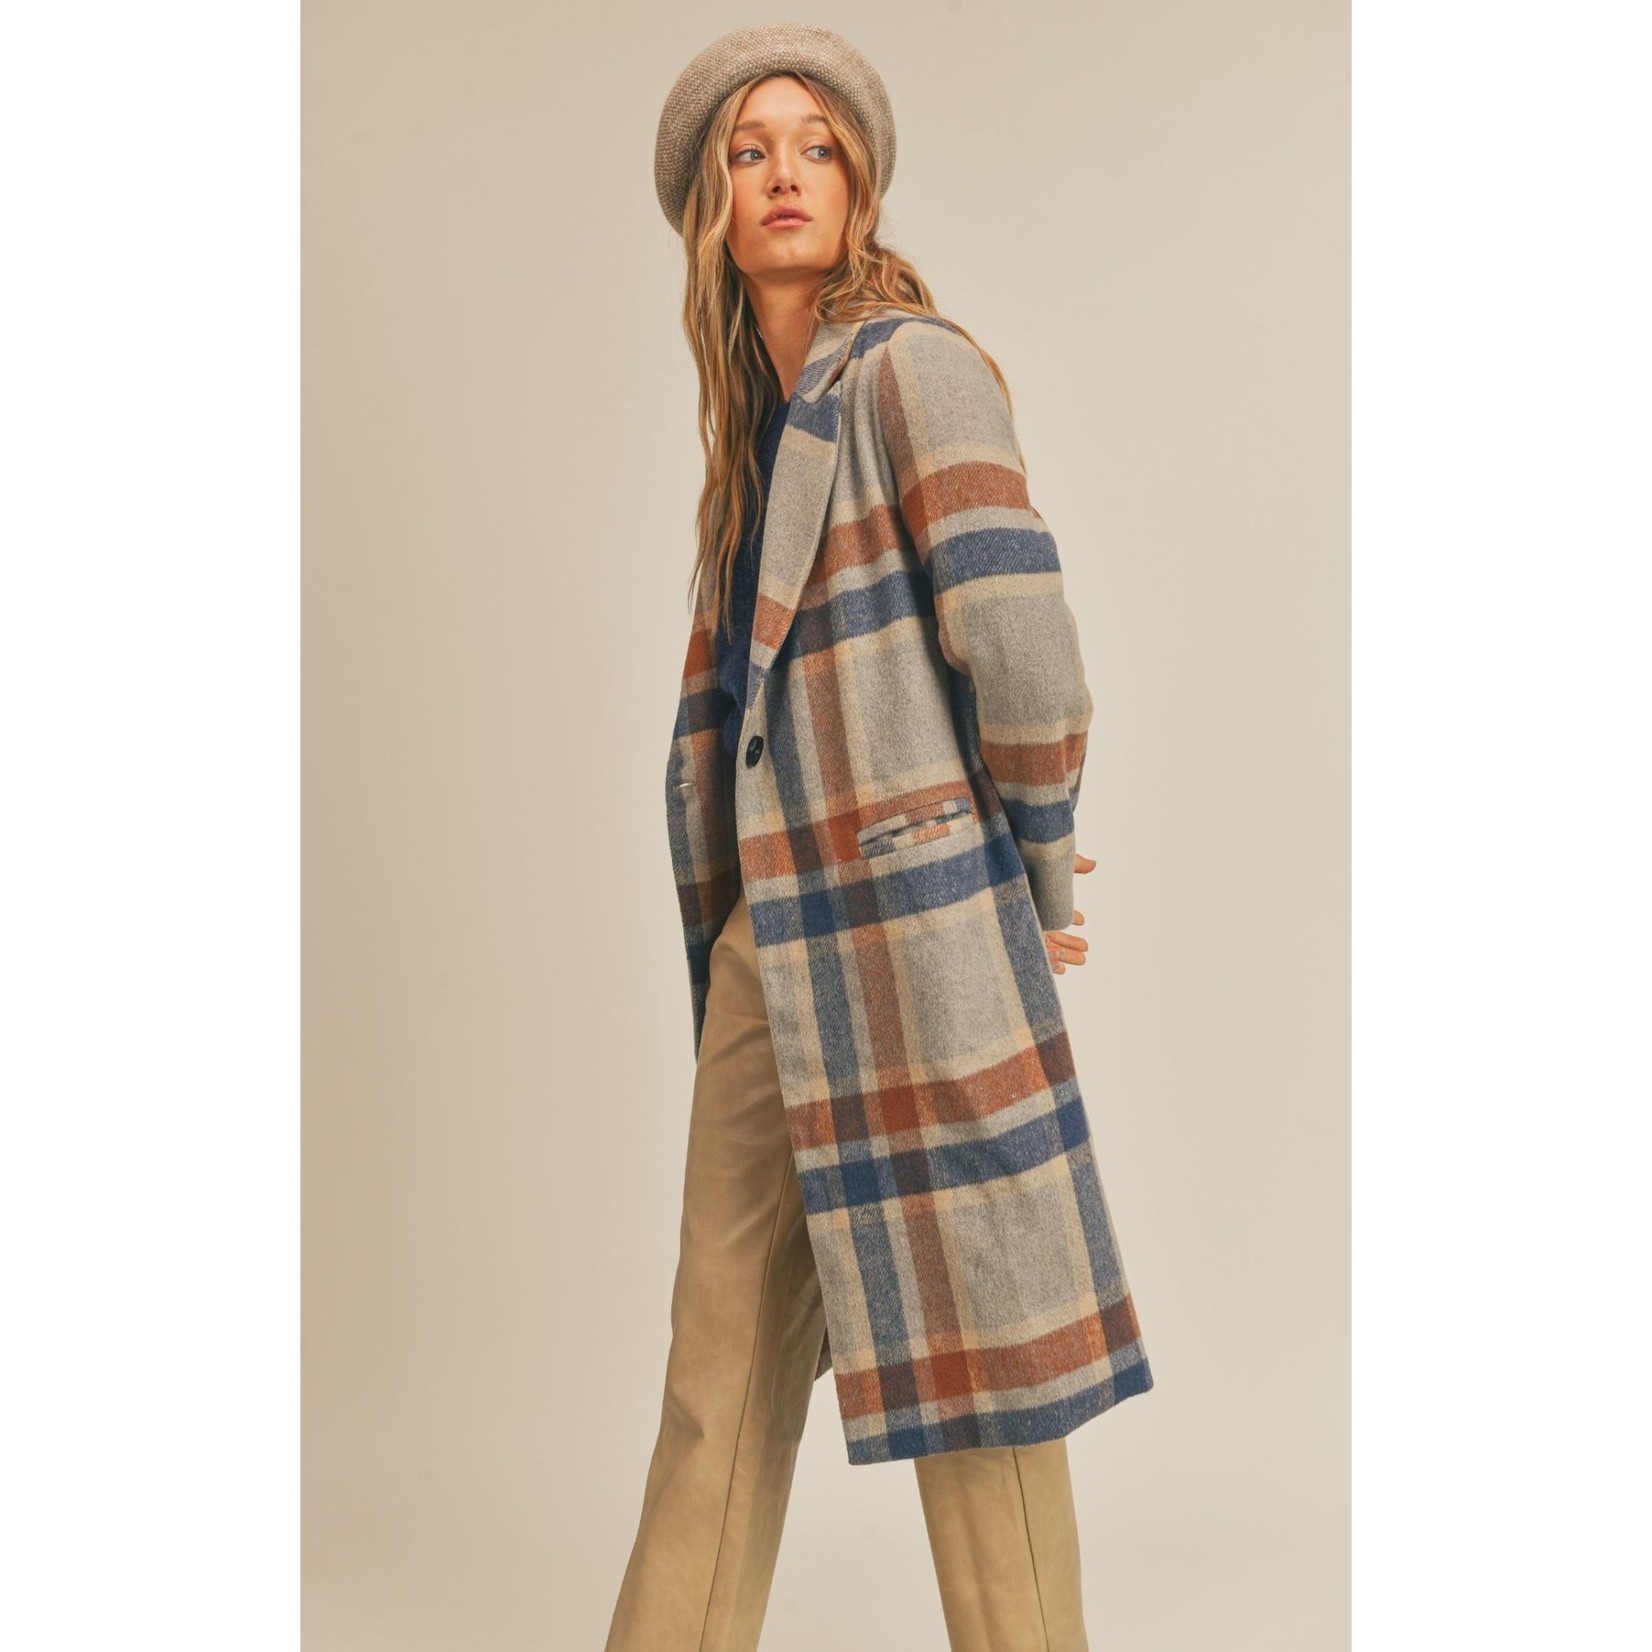 Sage the Label All the Way Plaid Coat